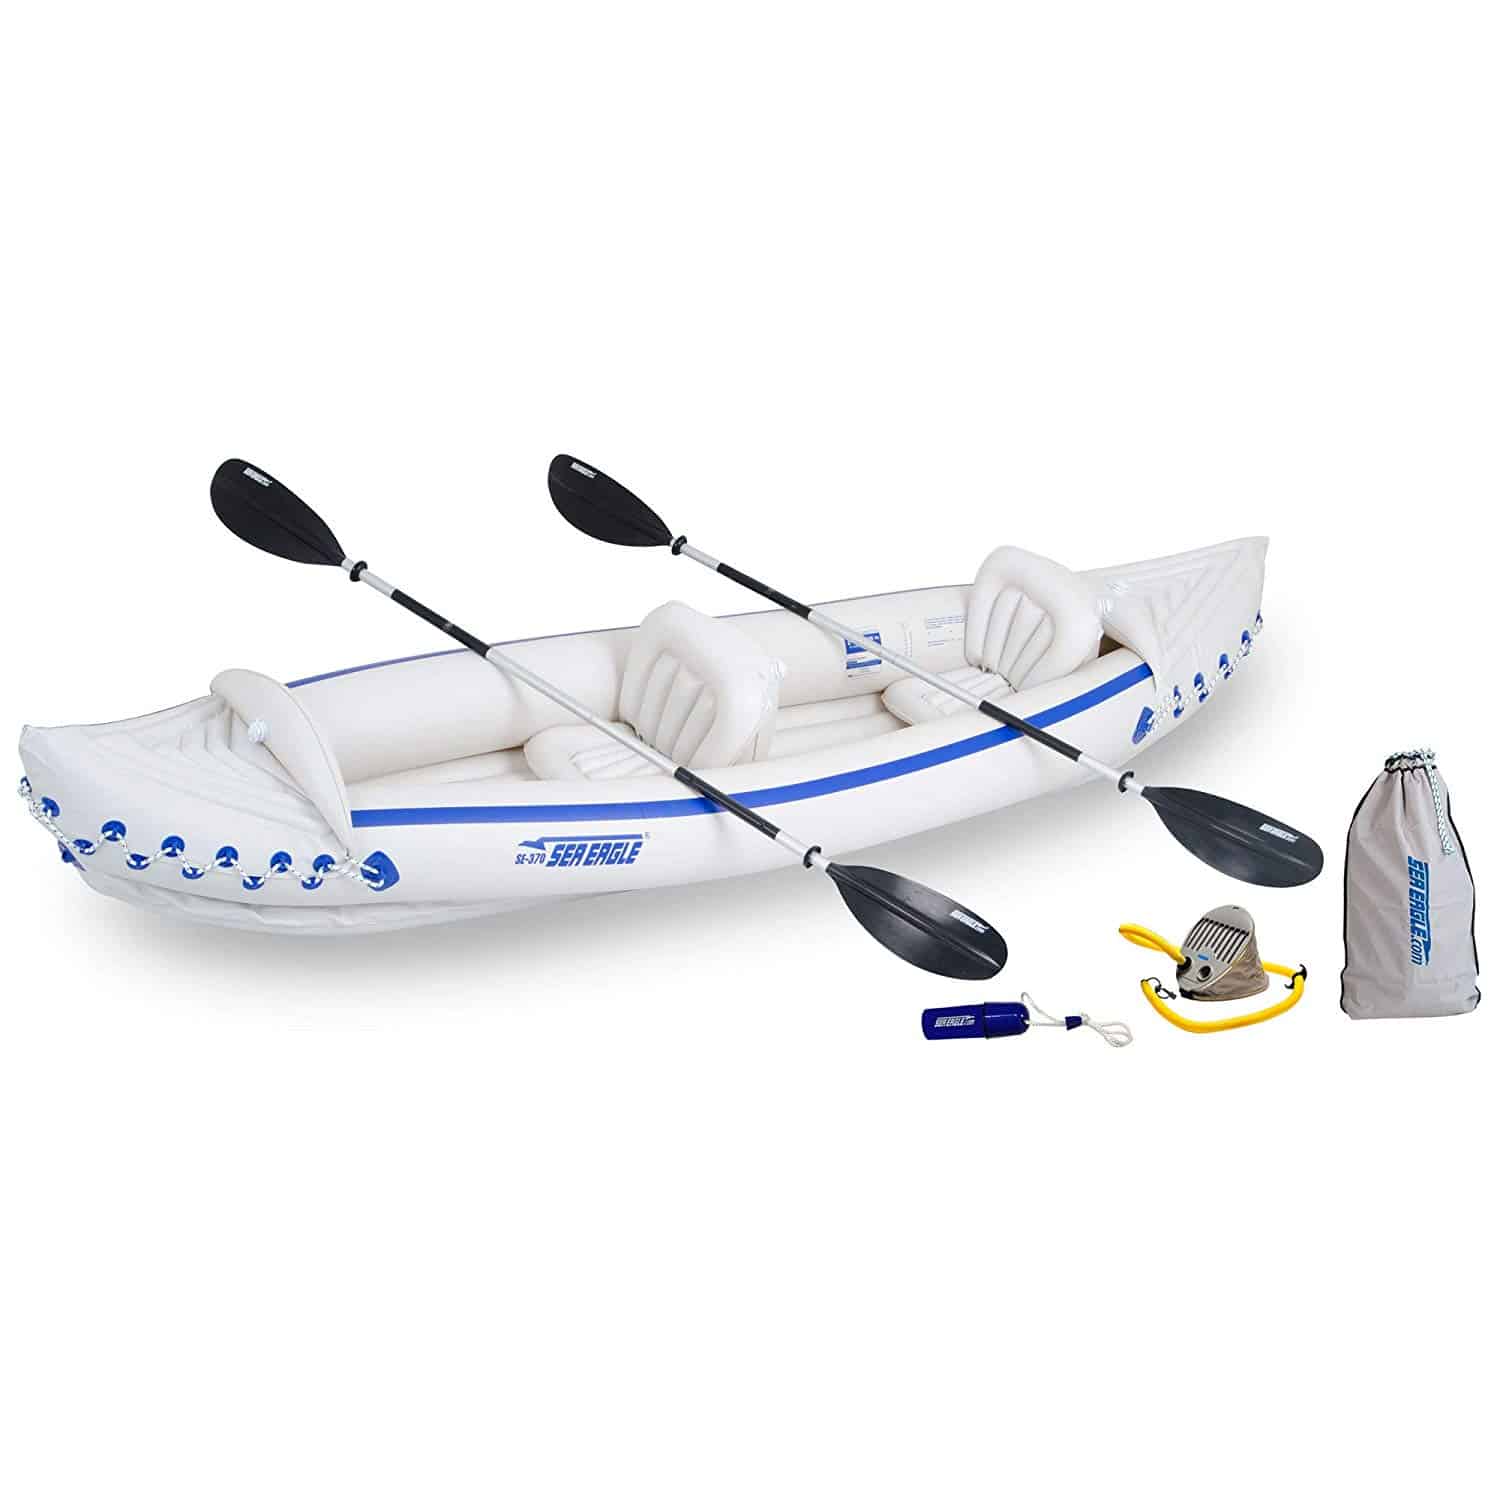 Sea Eagle 370 Delux 3 person Inflatable Portable Sport Kayak